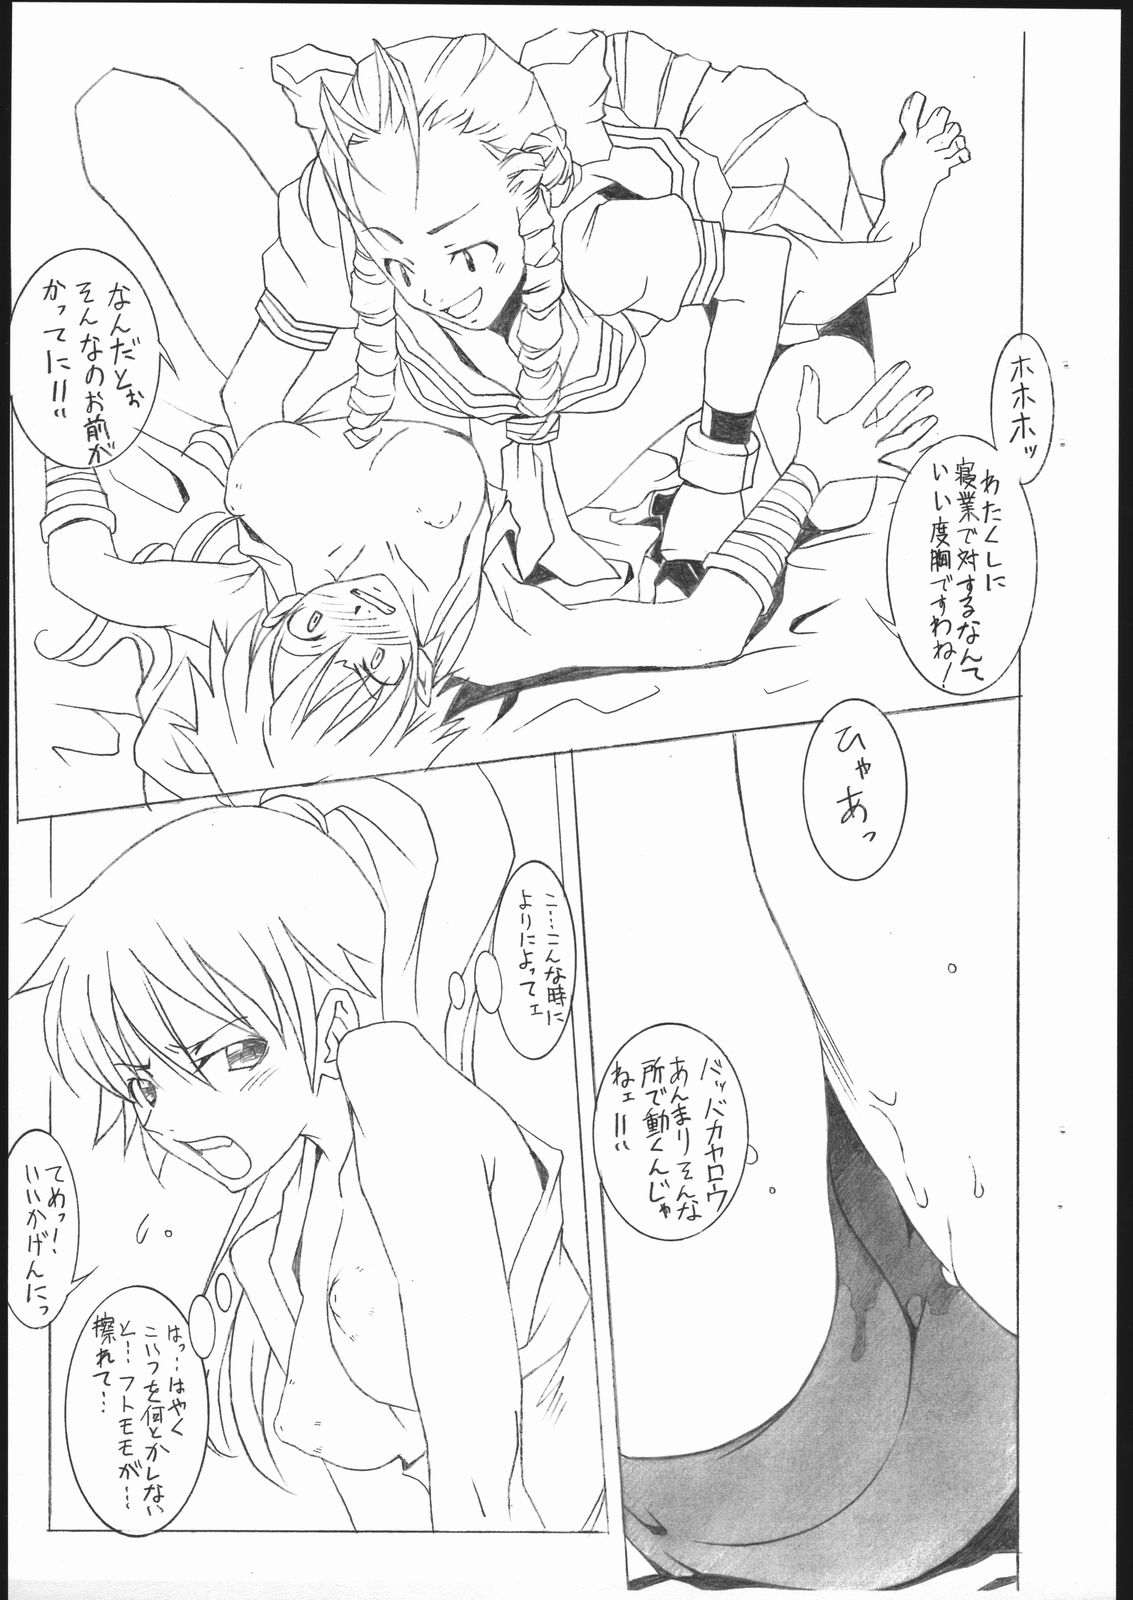 (C62) [Mushimusume Aikoukai (ASTROGUYII)] M&K Ver.2 (Street Fighter, King of Fighters) page 9 full